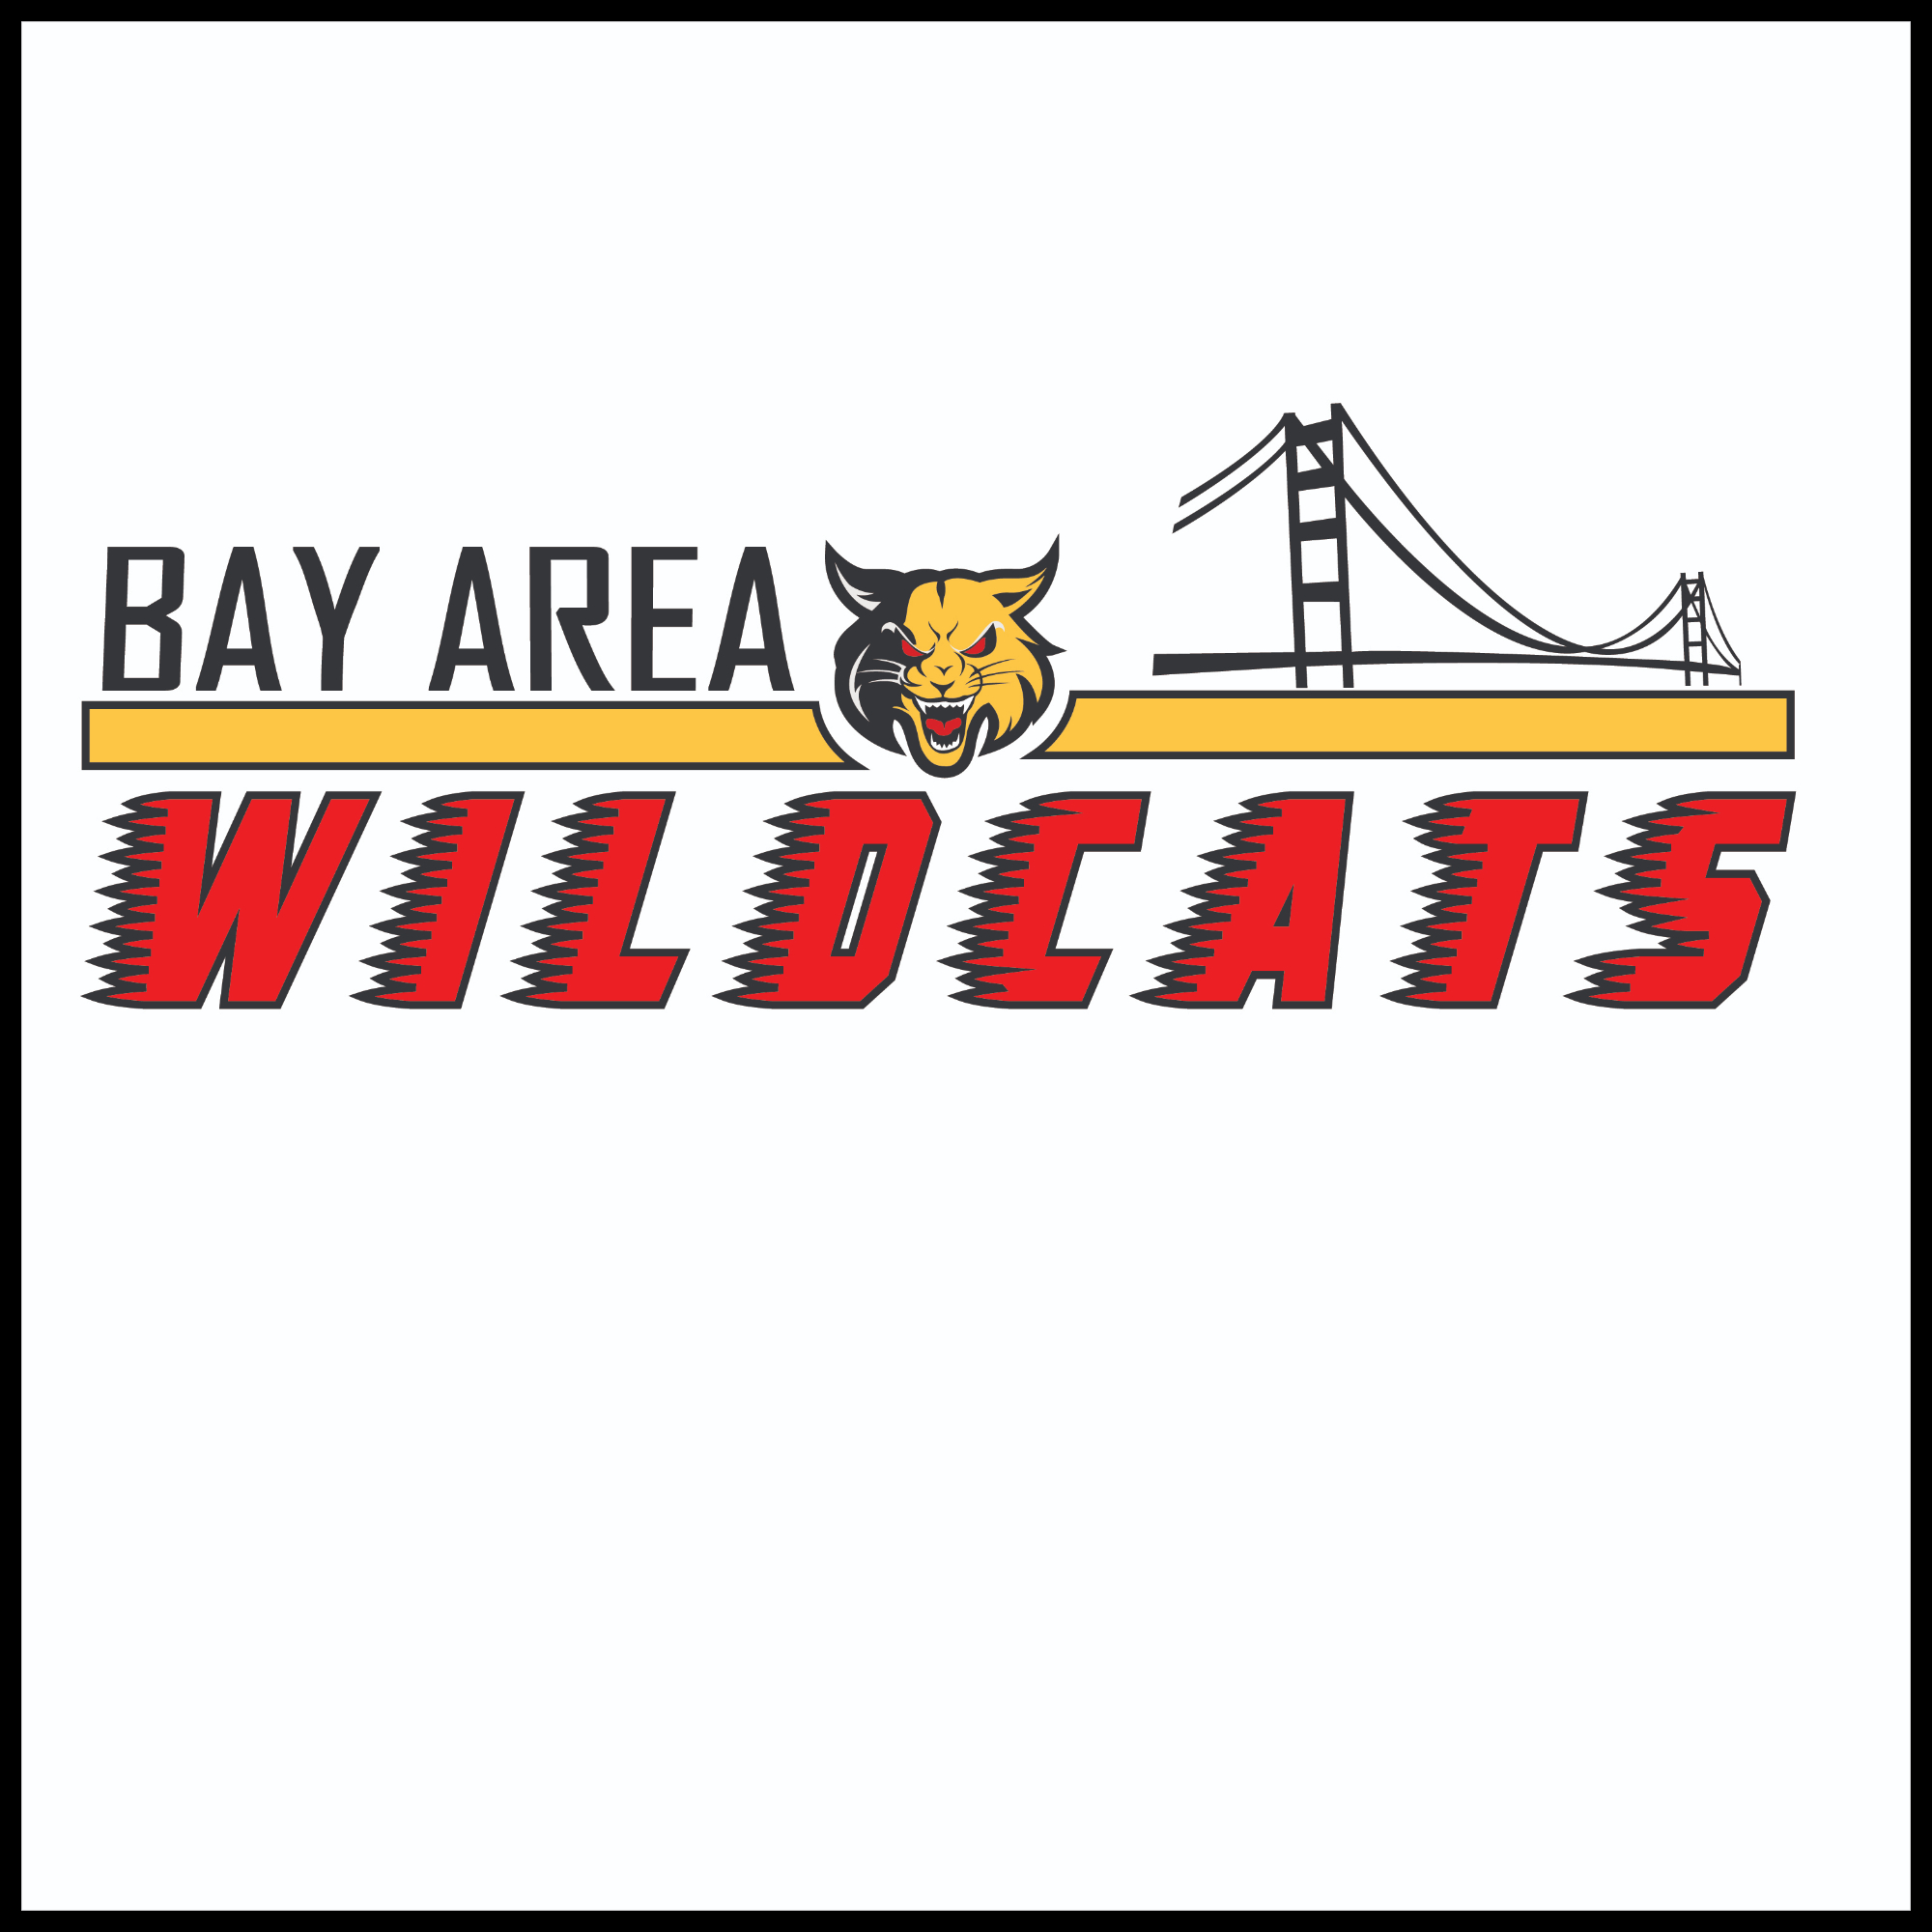 The official logo of Bay Area Wildcats Academy